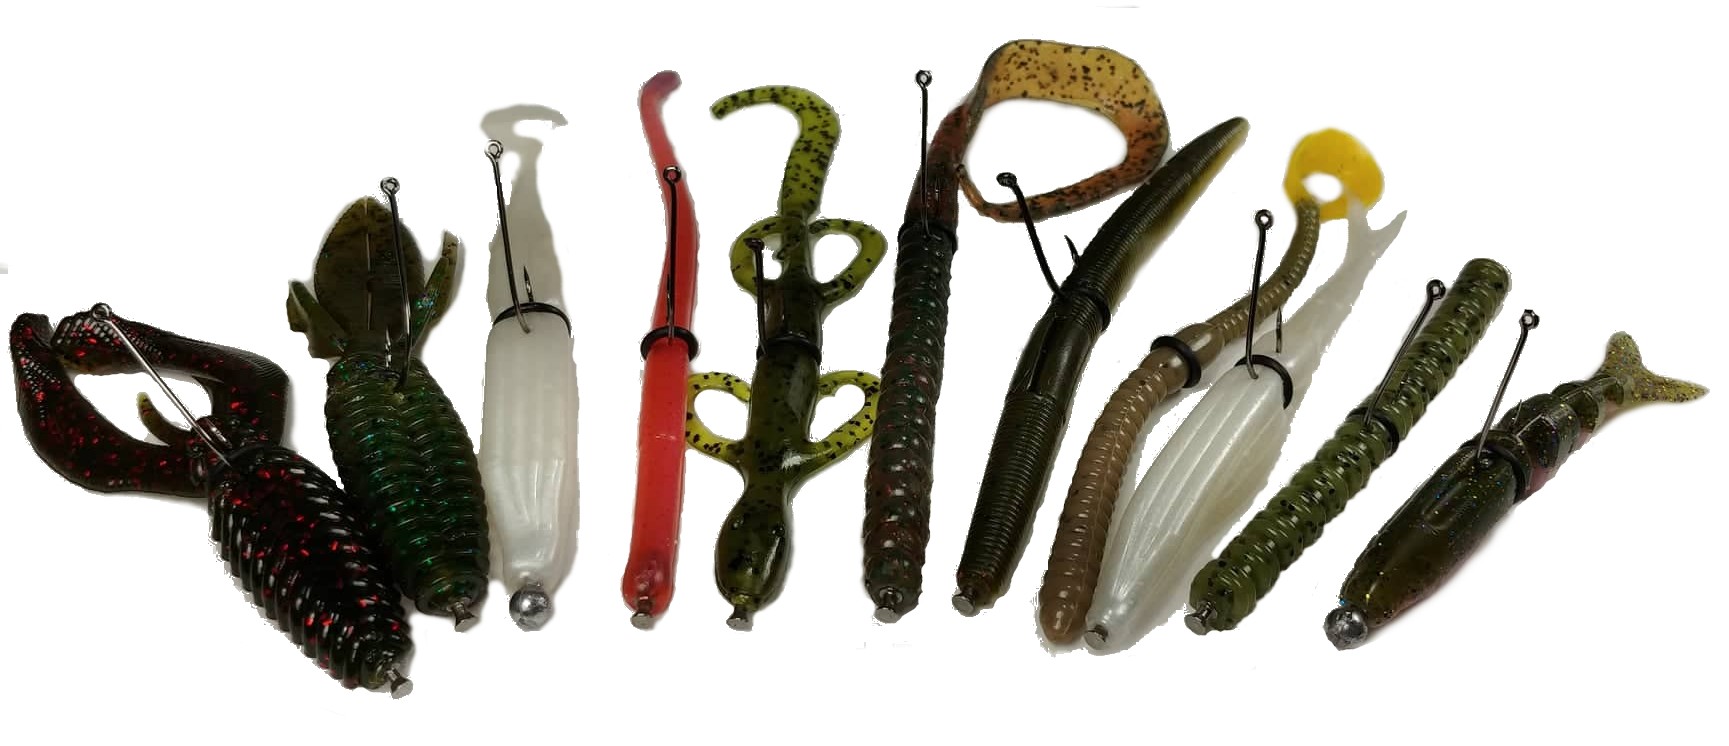 55 Of The Top Neko Rig Worms and Baits Pro Bass Anglers Are Keeping